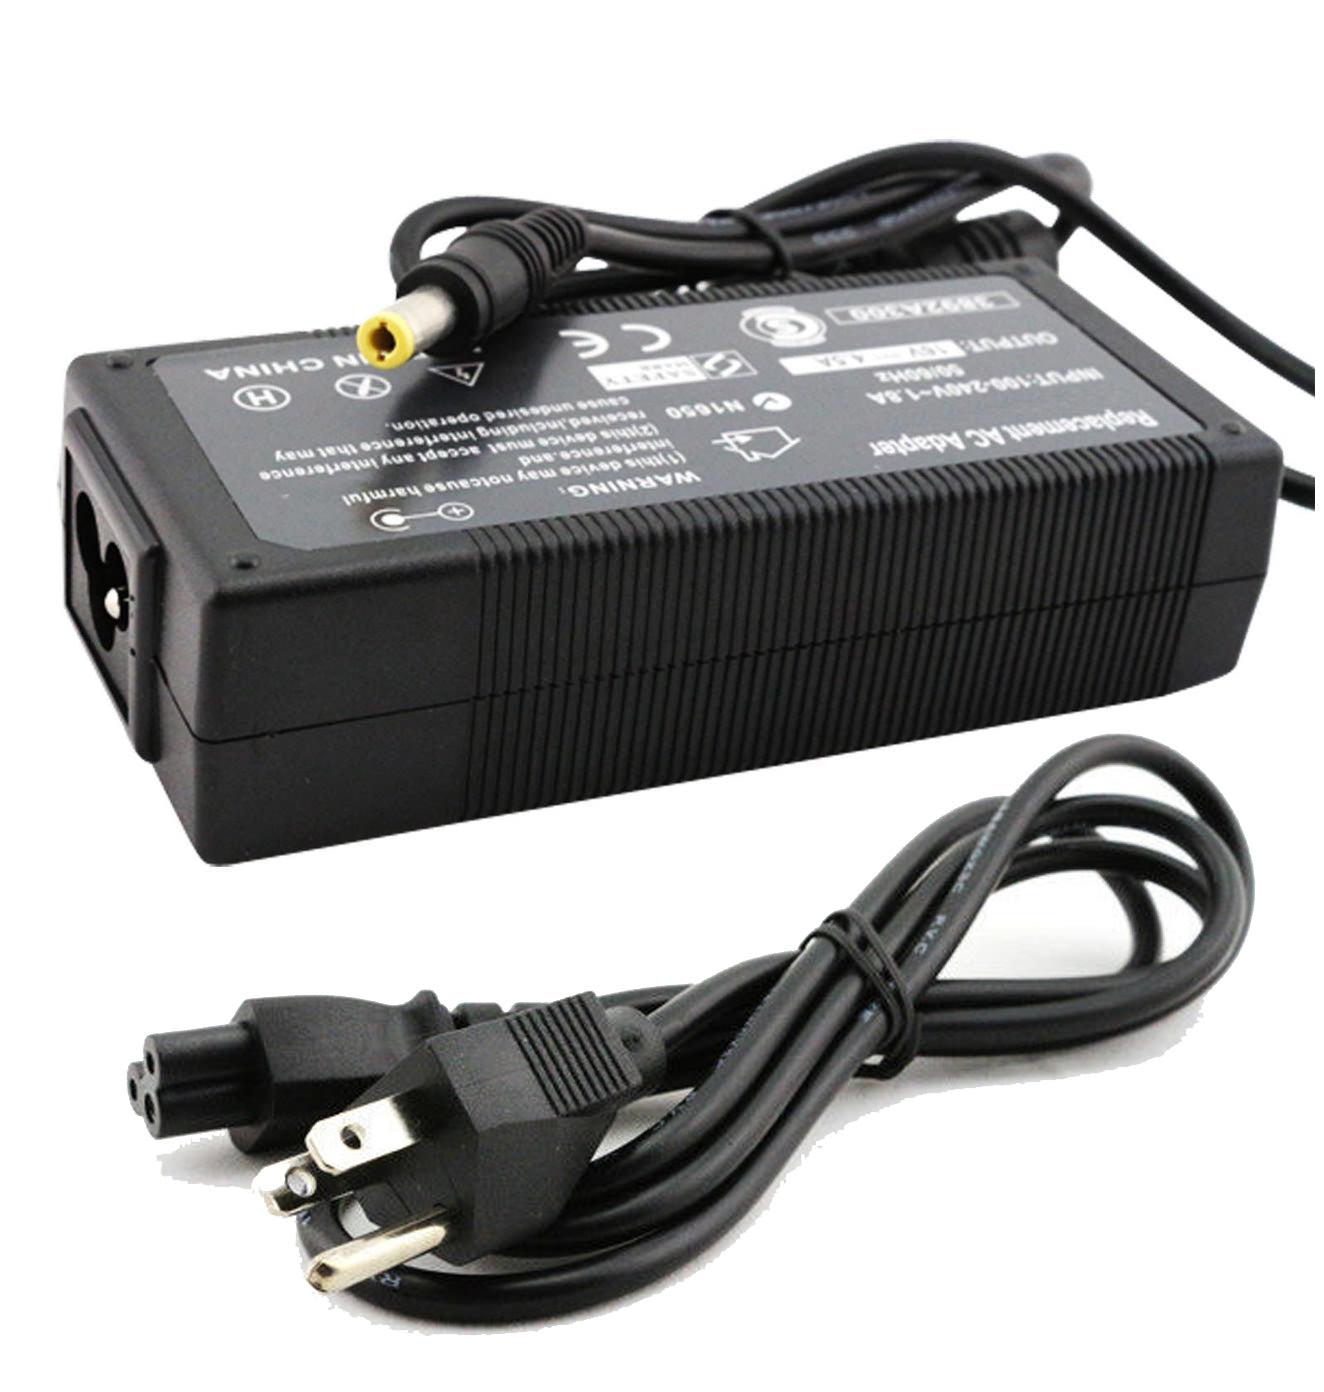 AC Adapter Charger for Panasonic Toughbook CF-F8 Notebook.